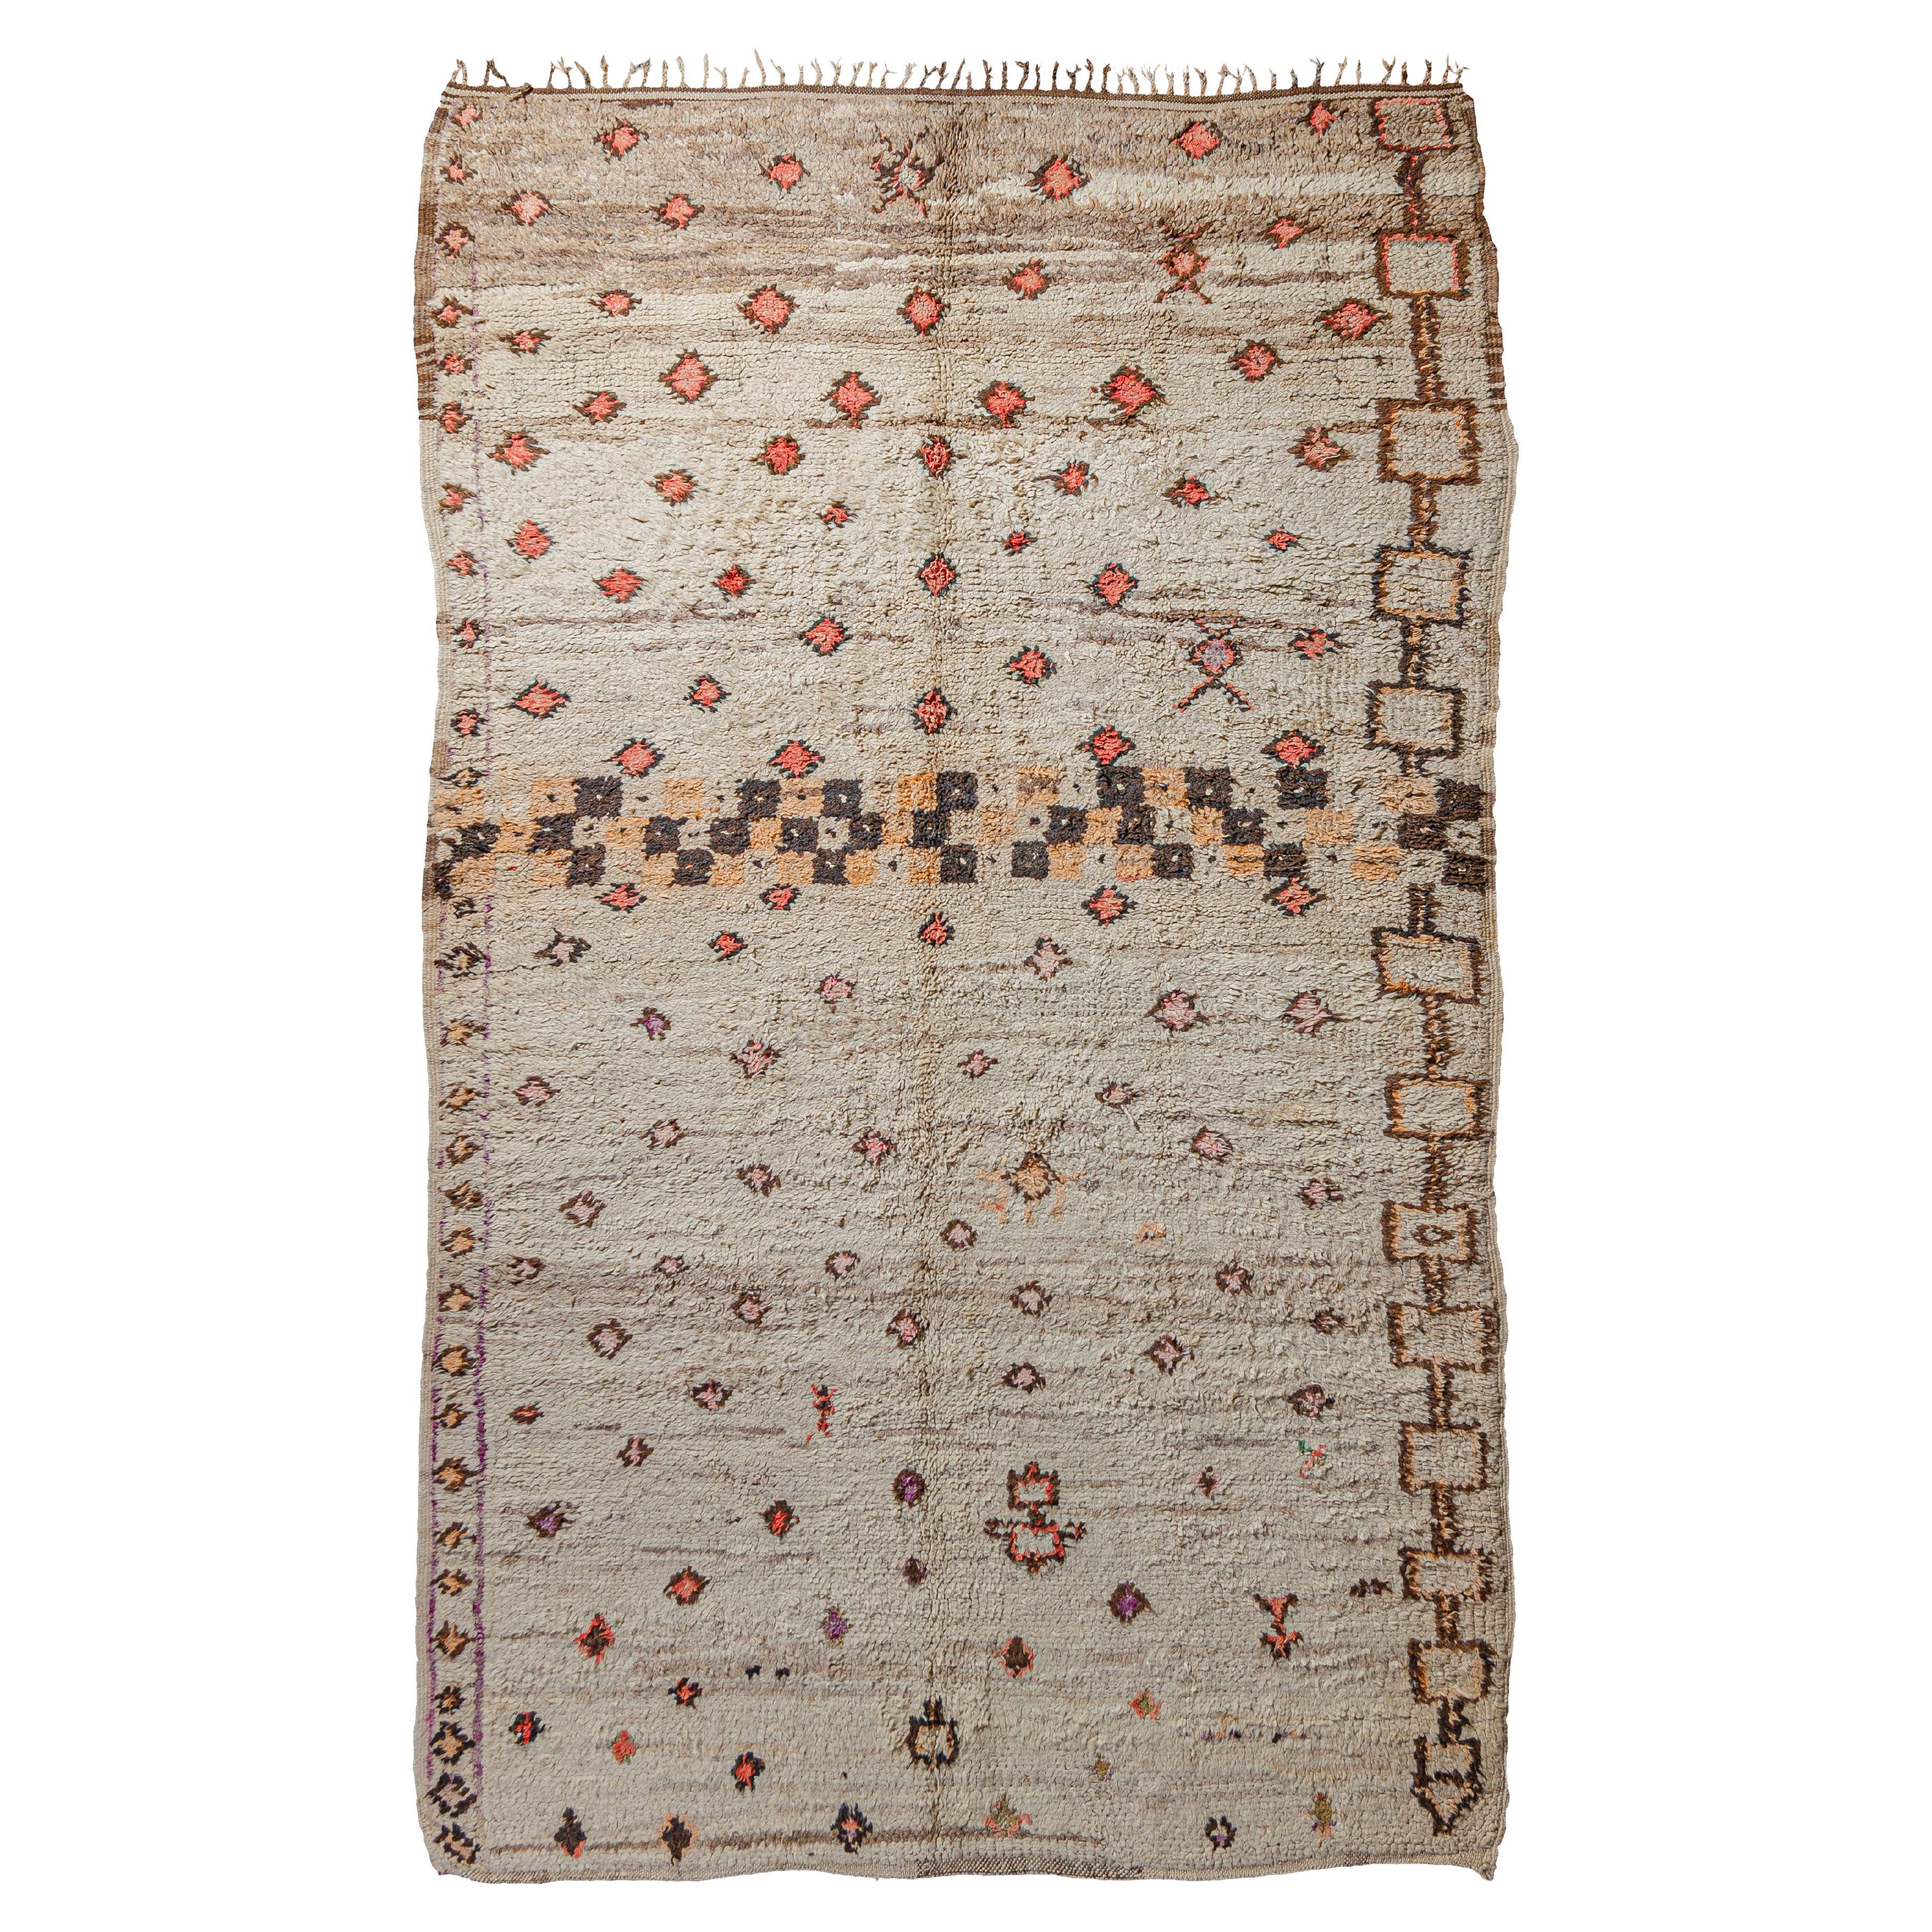 Unusual vintage abstract Moroccan Beni Ouarain rug curated by Breuckelen Berber